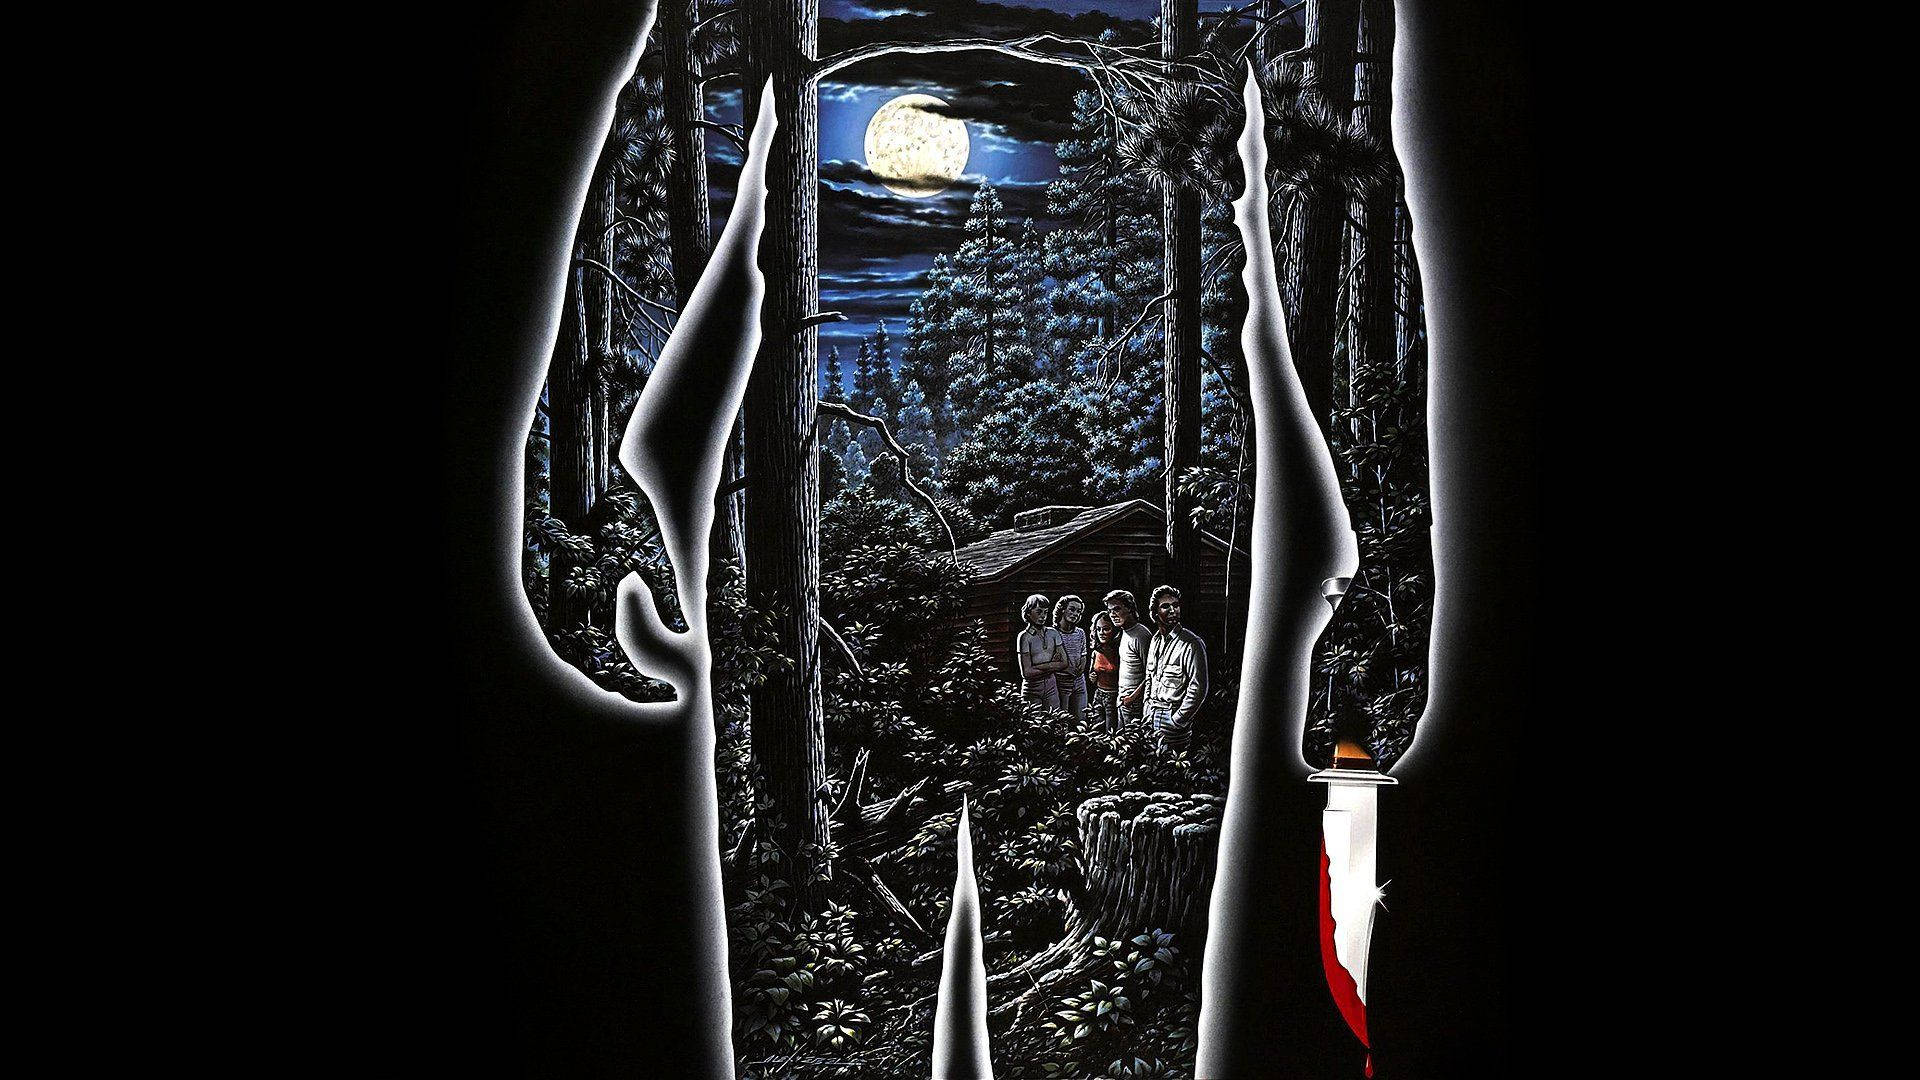 First Poster Of Friday The 13th Background